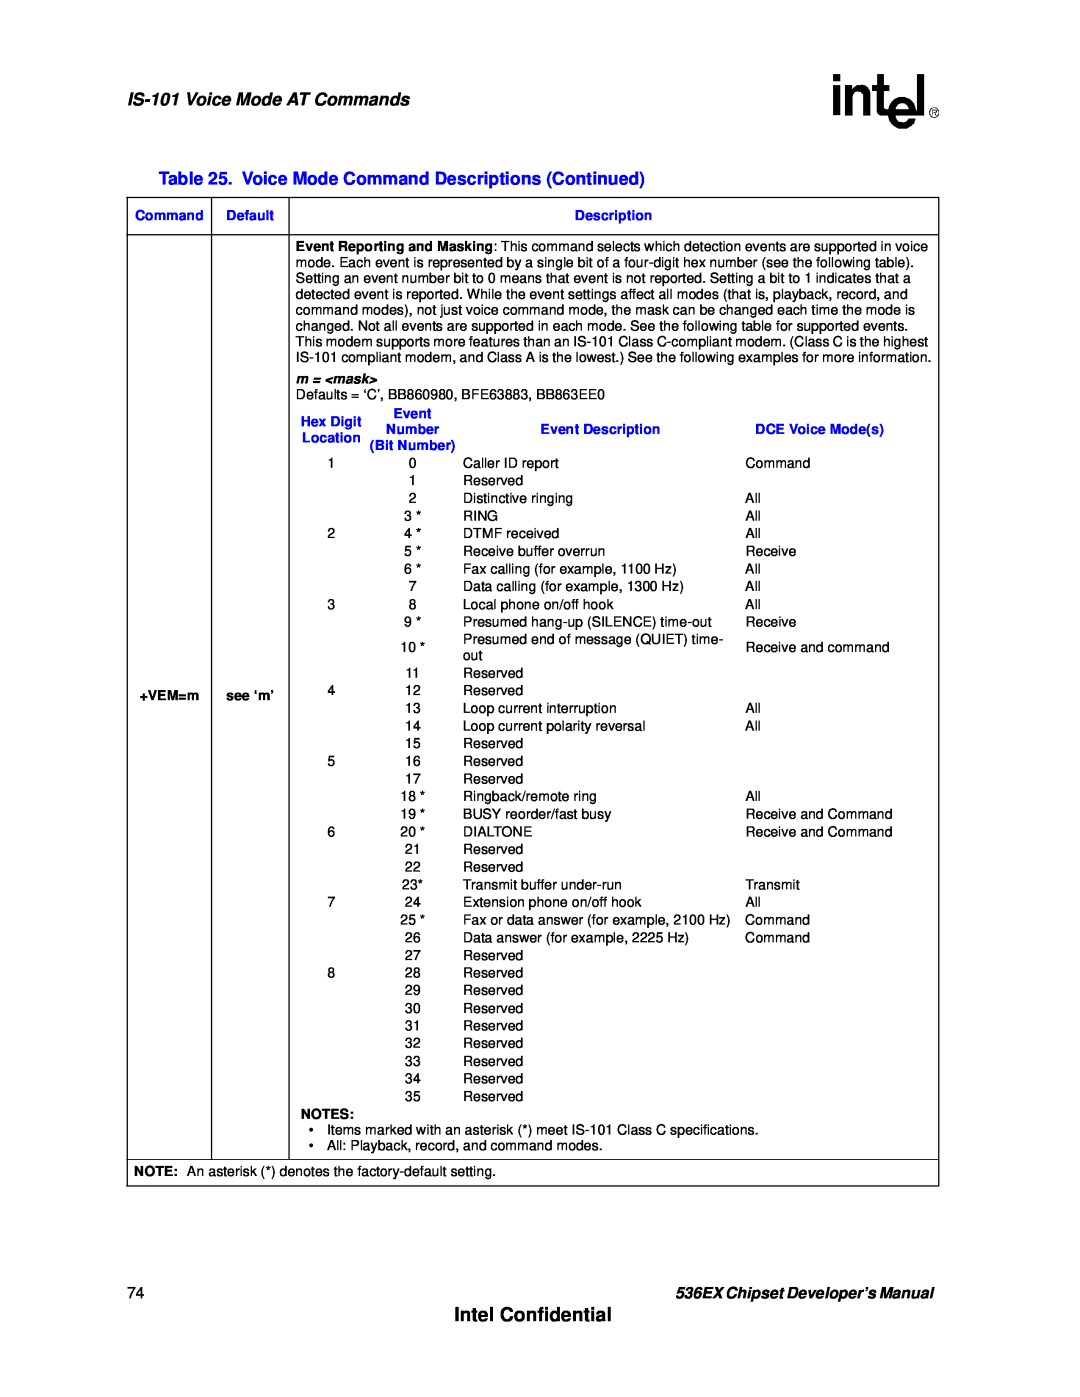 Intel 537EX manual Intel Confidential, IS-101Voice Mode AT Commands, m = <mask>, +VEM=m, see ‘m’, Notes 